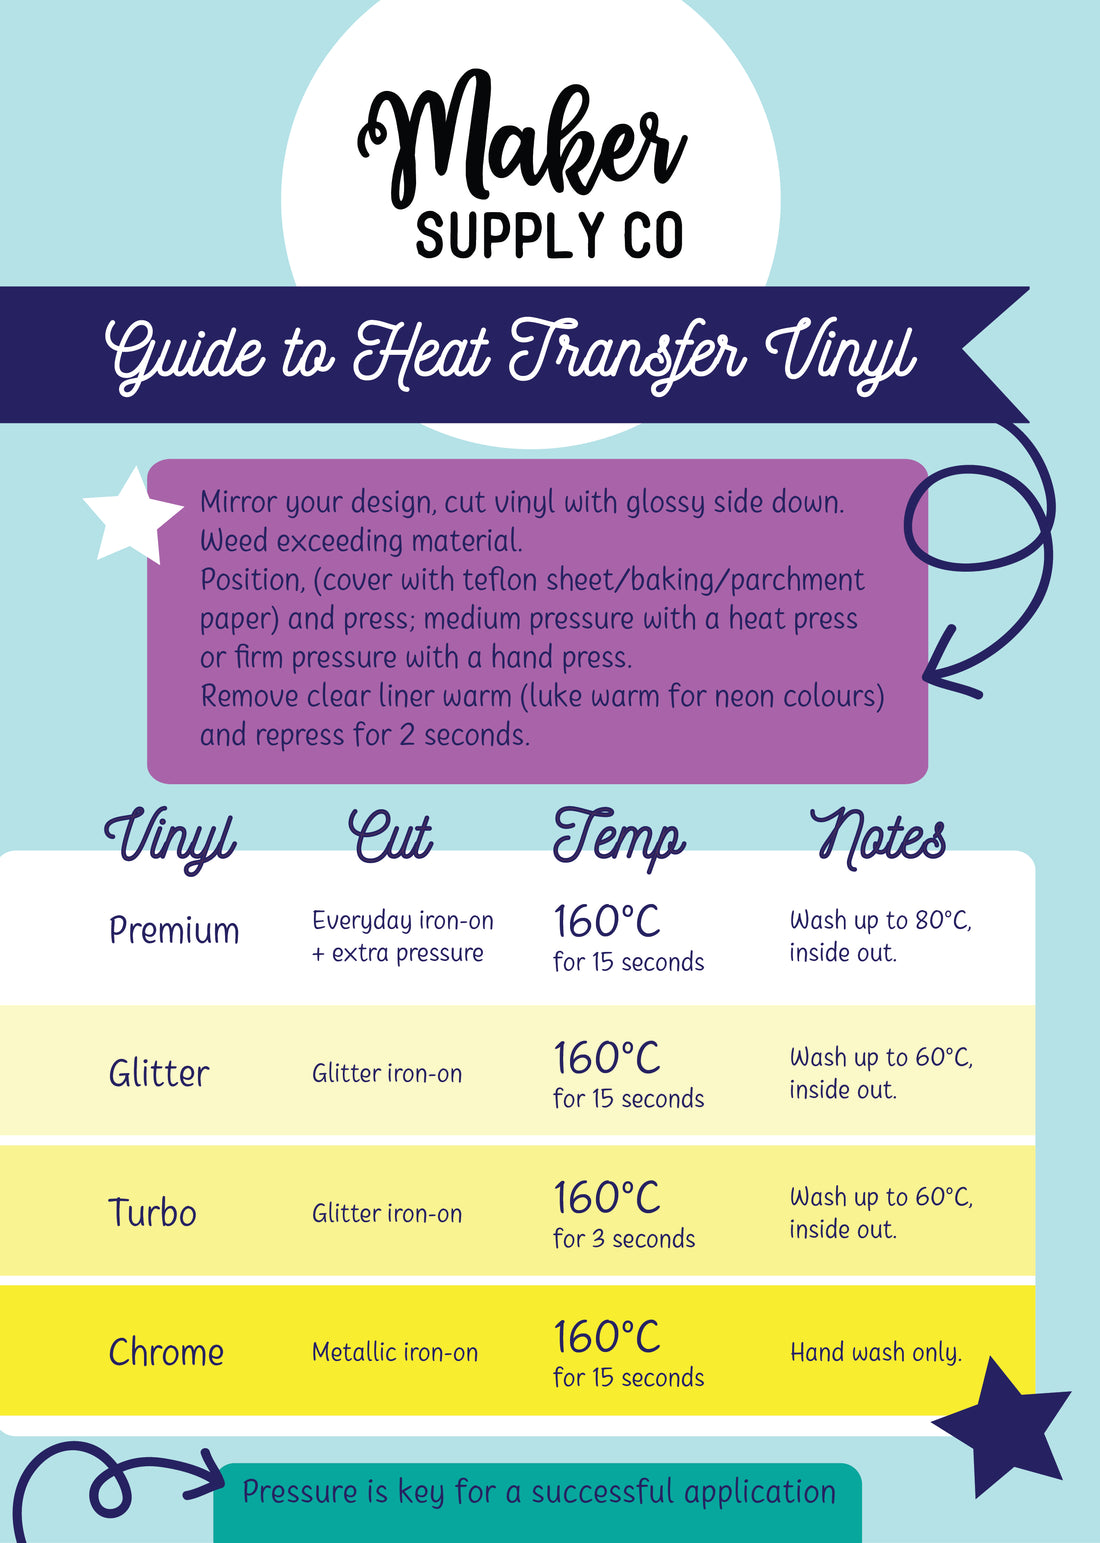 New quick guide to our heat transfer vinyl.